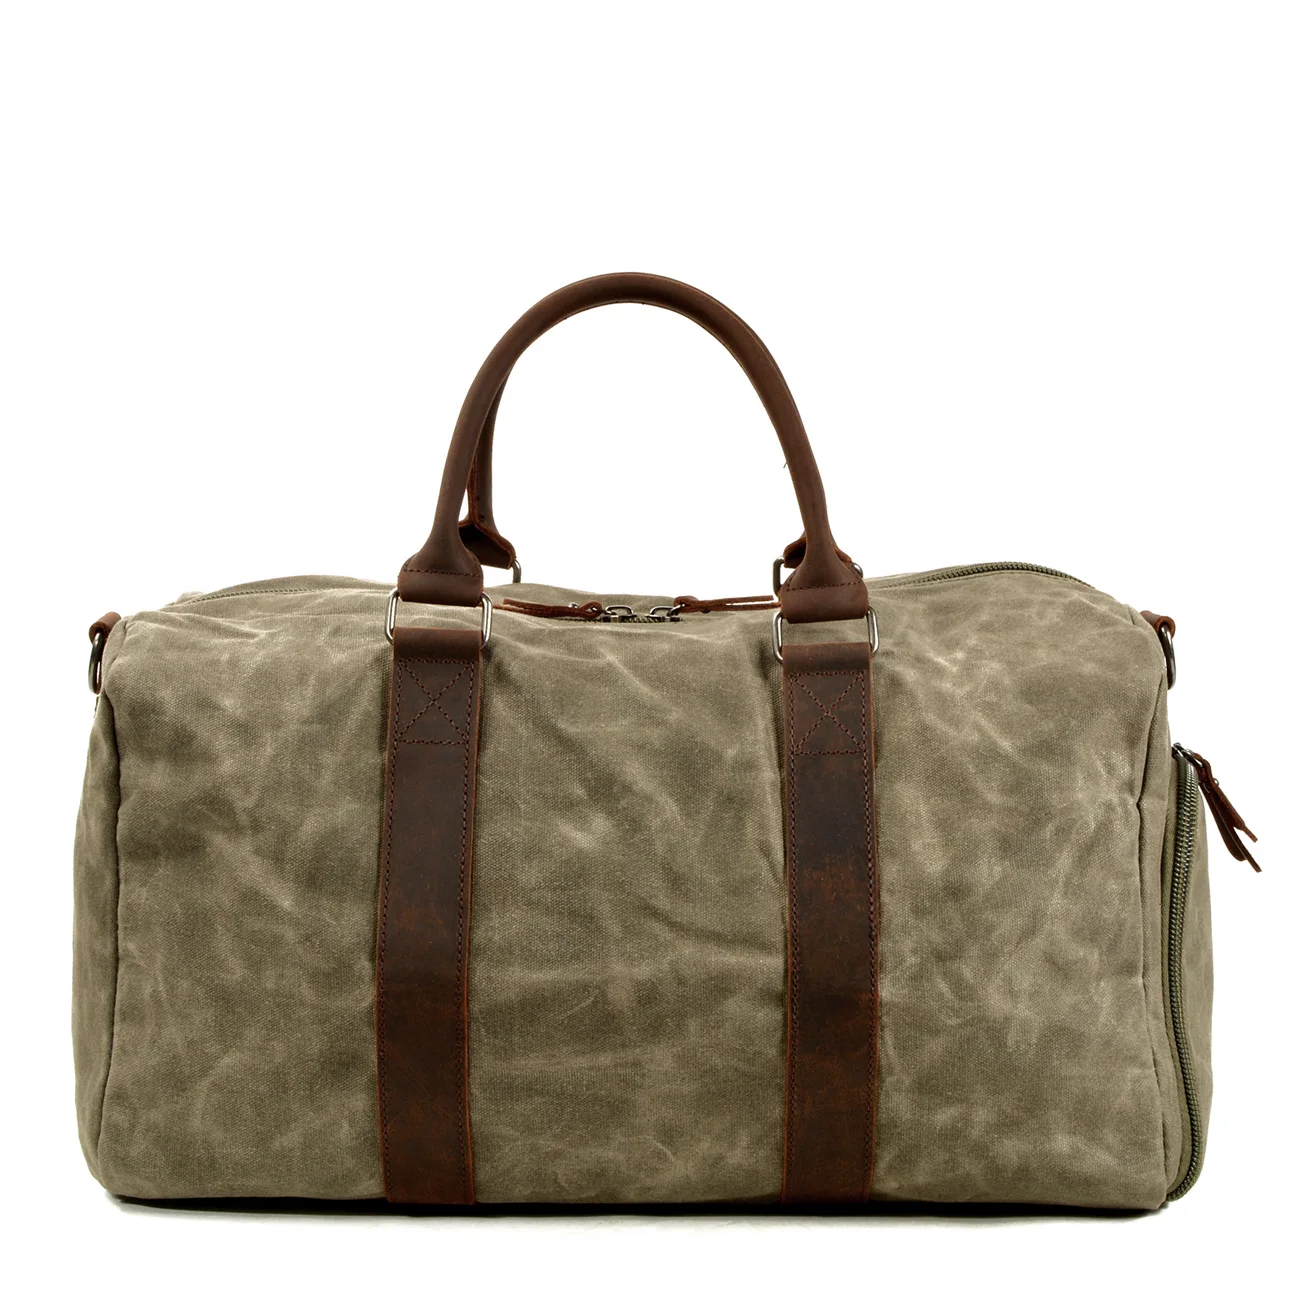 

waterproof Waxed Cotton Canvas With Leather Carry On Travel Duffel Bag, Khaki,dark green, gray,army green